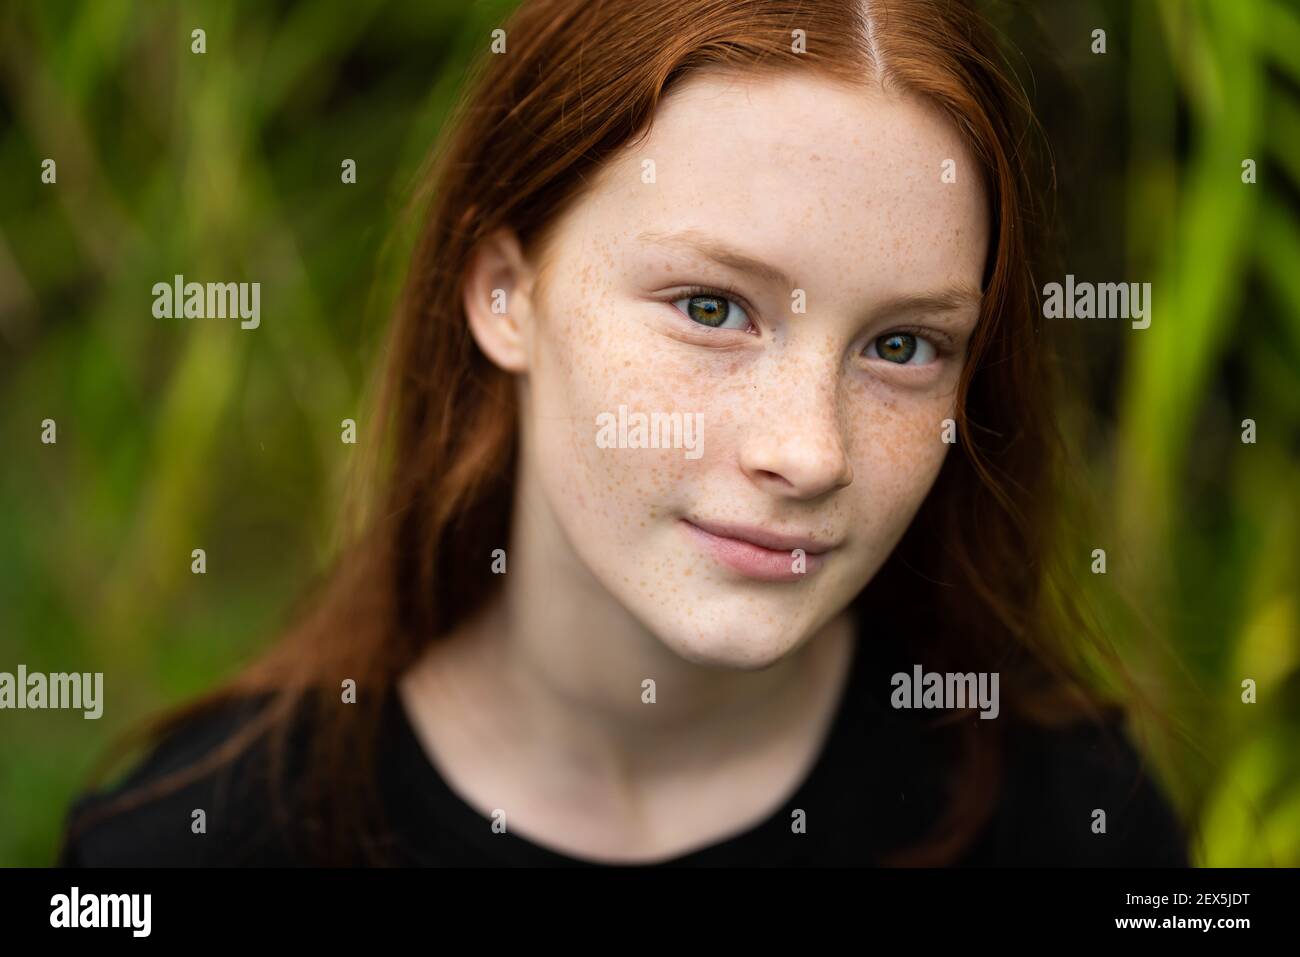 Red haired twelve year old girl with freckles posing with a nature bokeh background Stock Photo